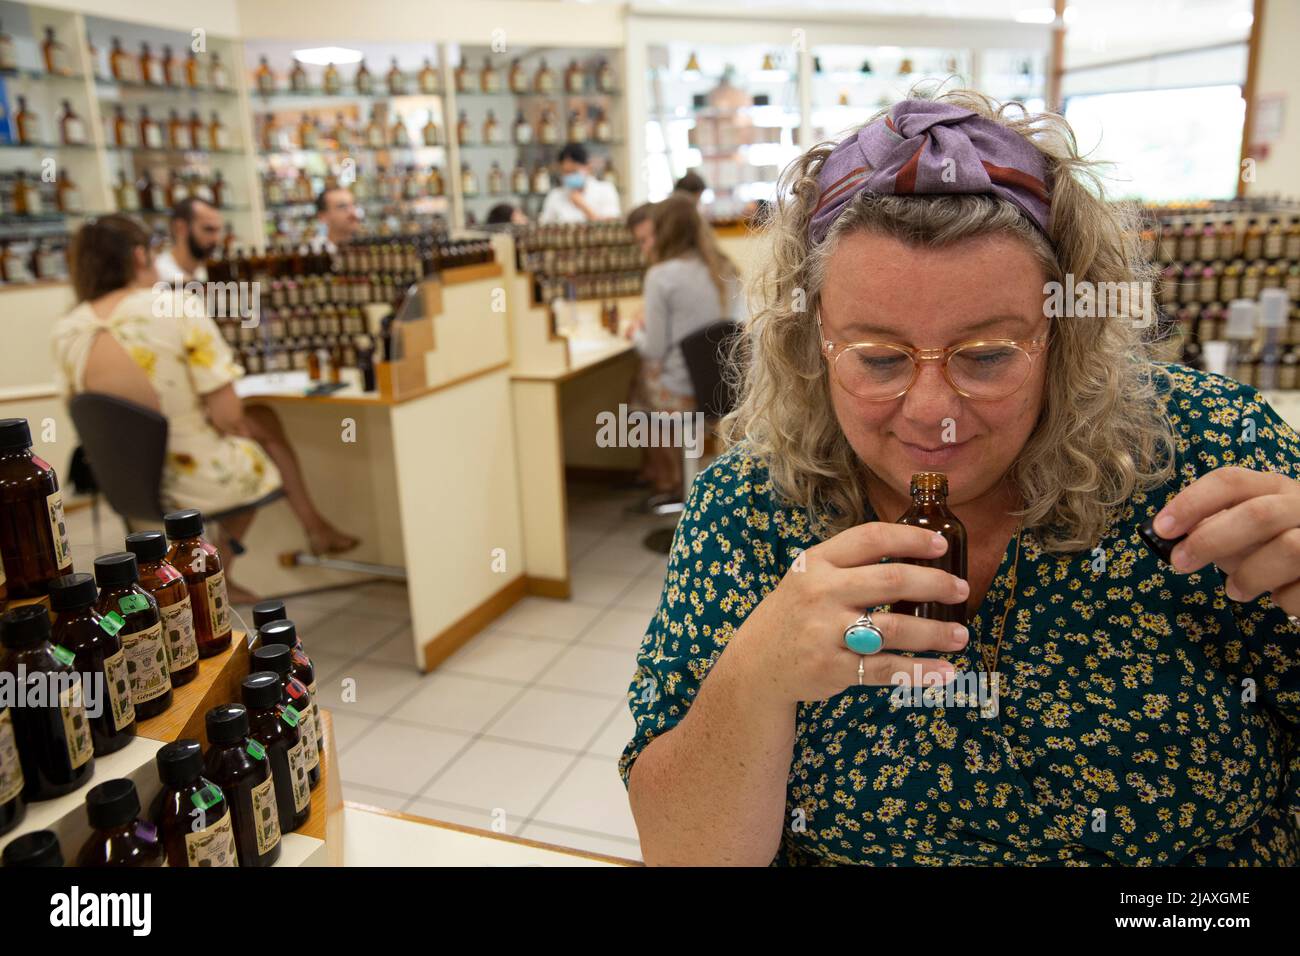 Mariska Lokker, 49, a tourist from the Netherlands, creating her own fragrance during a workshop at the Galimard Studio des Fragrances in Grasse, France on September 10, 2021. Grasse has had a prospering perfume industry since the end of the 18th century and is considered the world's capital of perfume. There are numerous of old 'parfumeries' in Grasse, such as Galimard, Molinard and Fragonard, each with tours and a museum. Many 'noses' ('Les nez' in French) are trained or have spent time in Grasse to distinguish over 2,000 kinds of scent. Grasse produces over two-thirds of France's natural ar Stock Photo